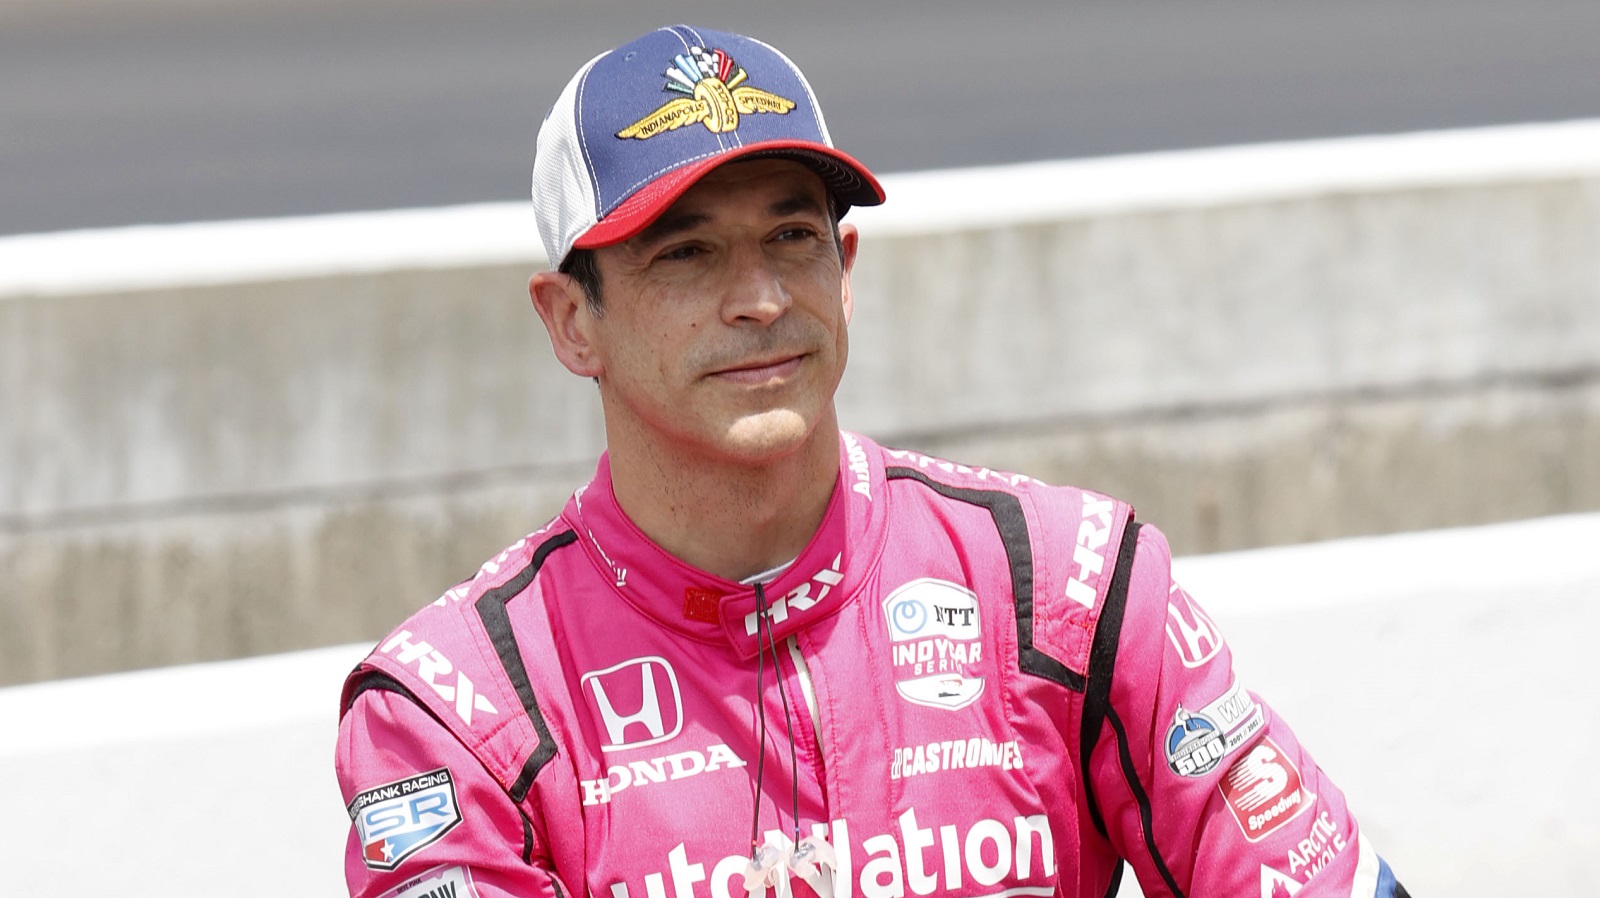 What Is Indianapolis 500 Legend Helio Castroneves’ Net Worth?